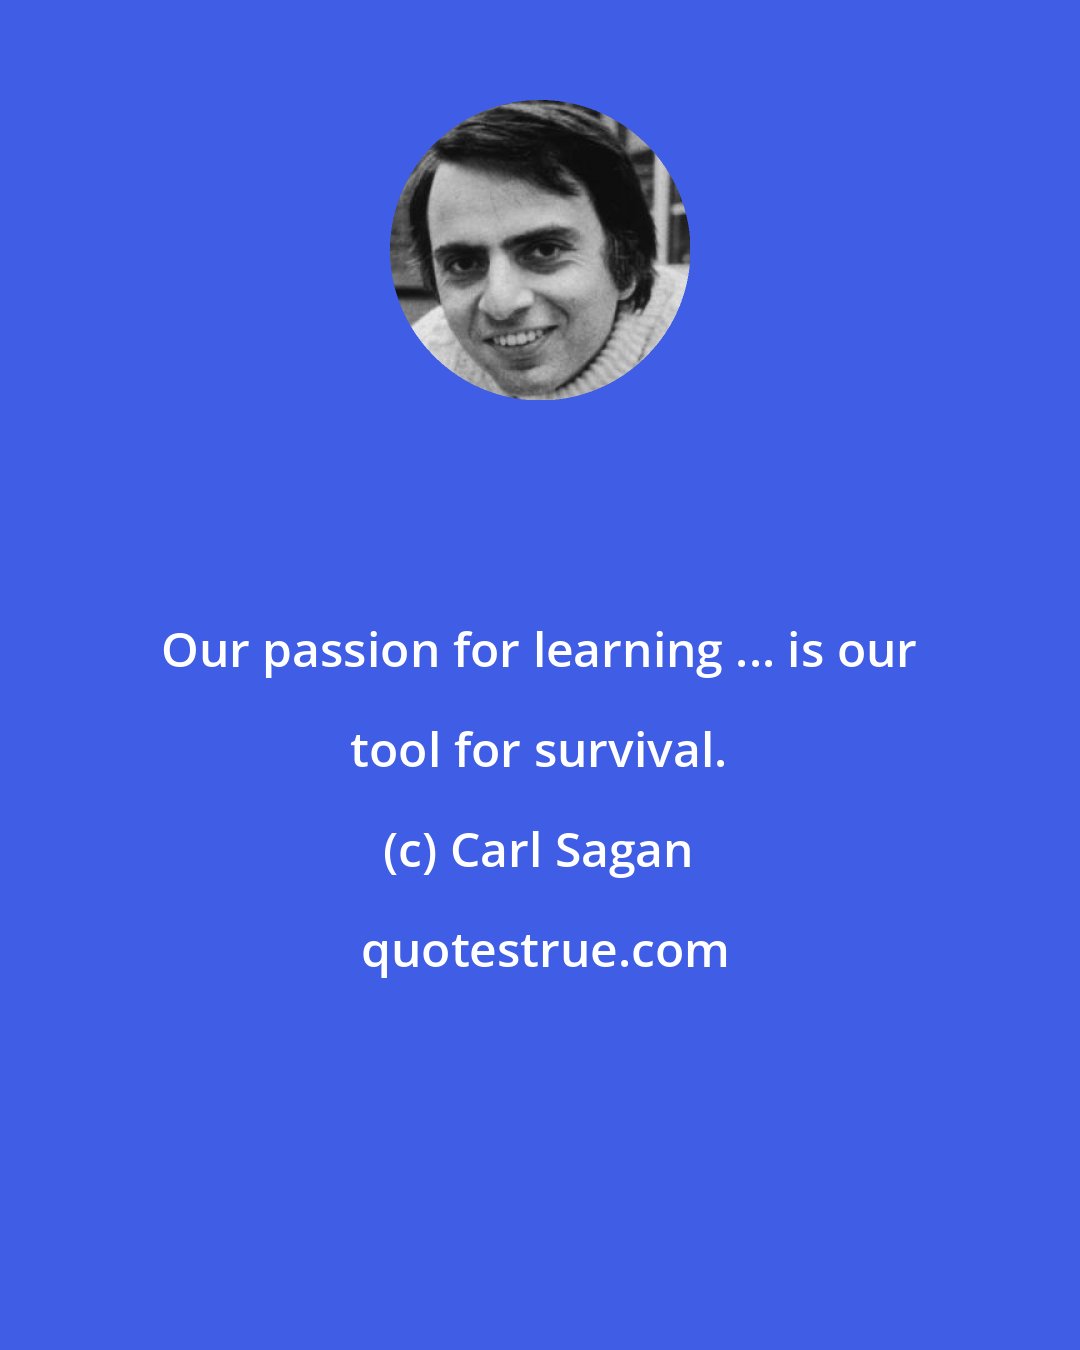 Carl Sagan: Our passion for learning ... is our tool for survival.